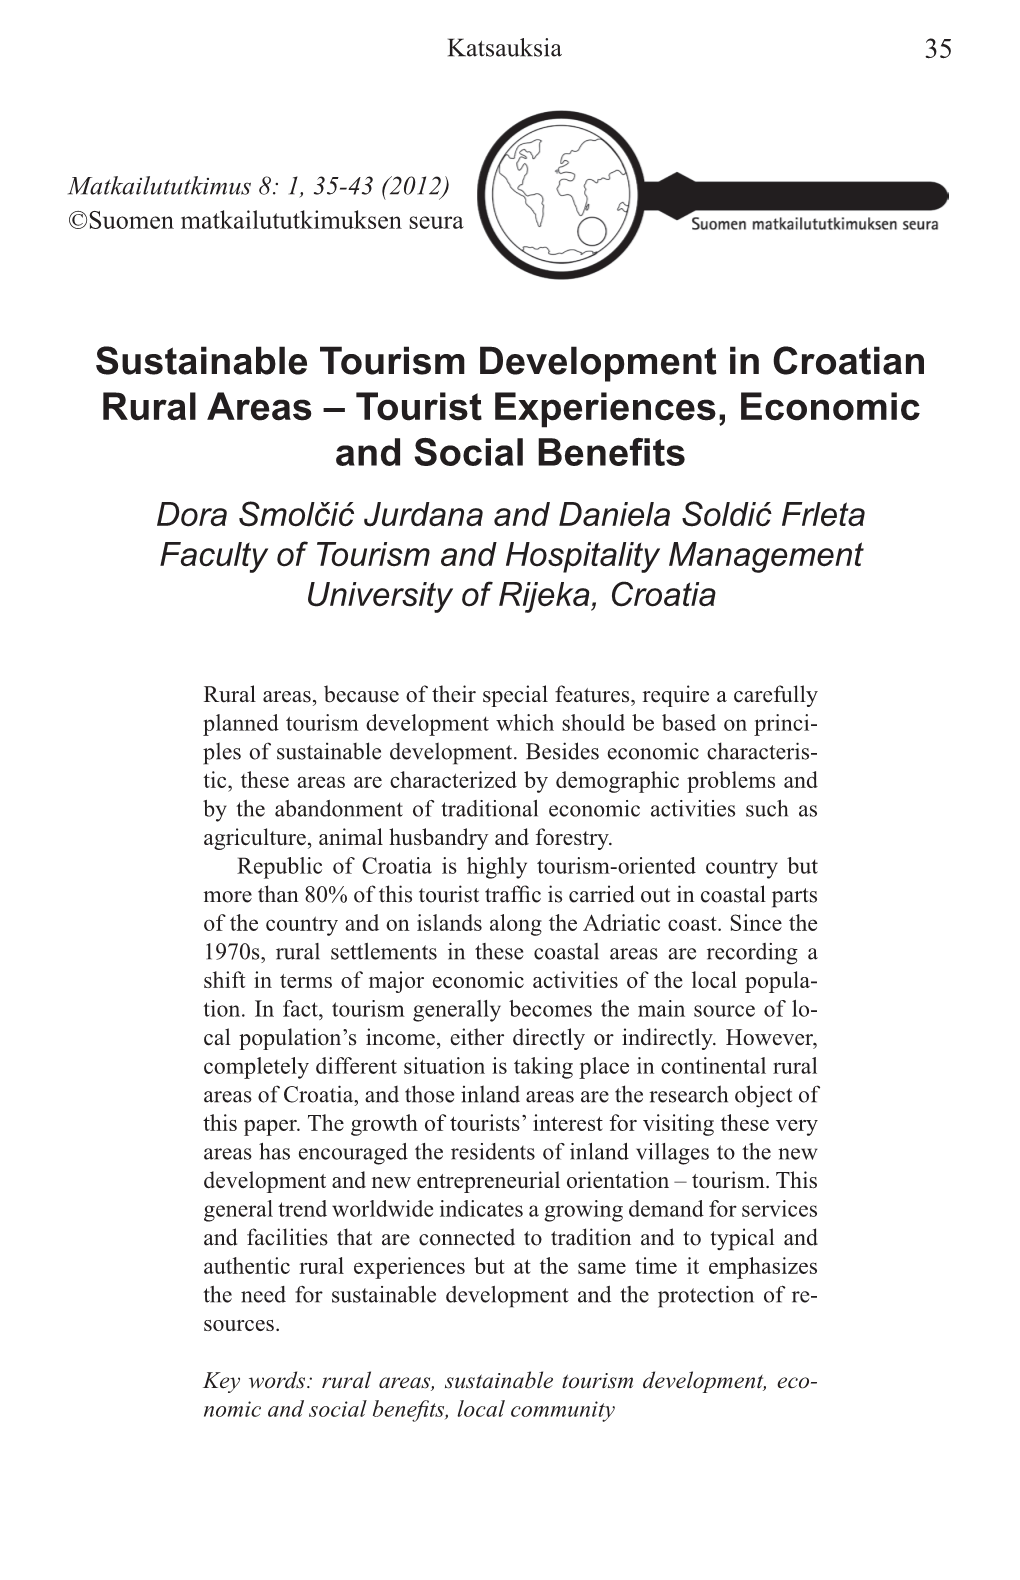 Sustainable Tourism Development in Croatian Rural Areas